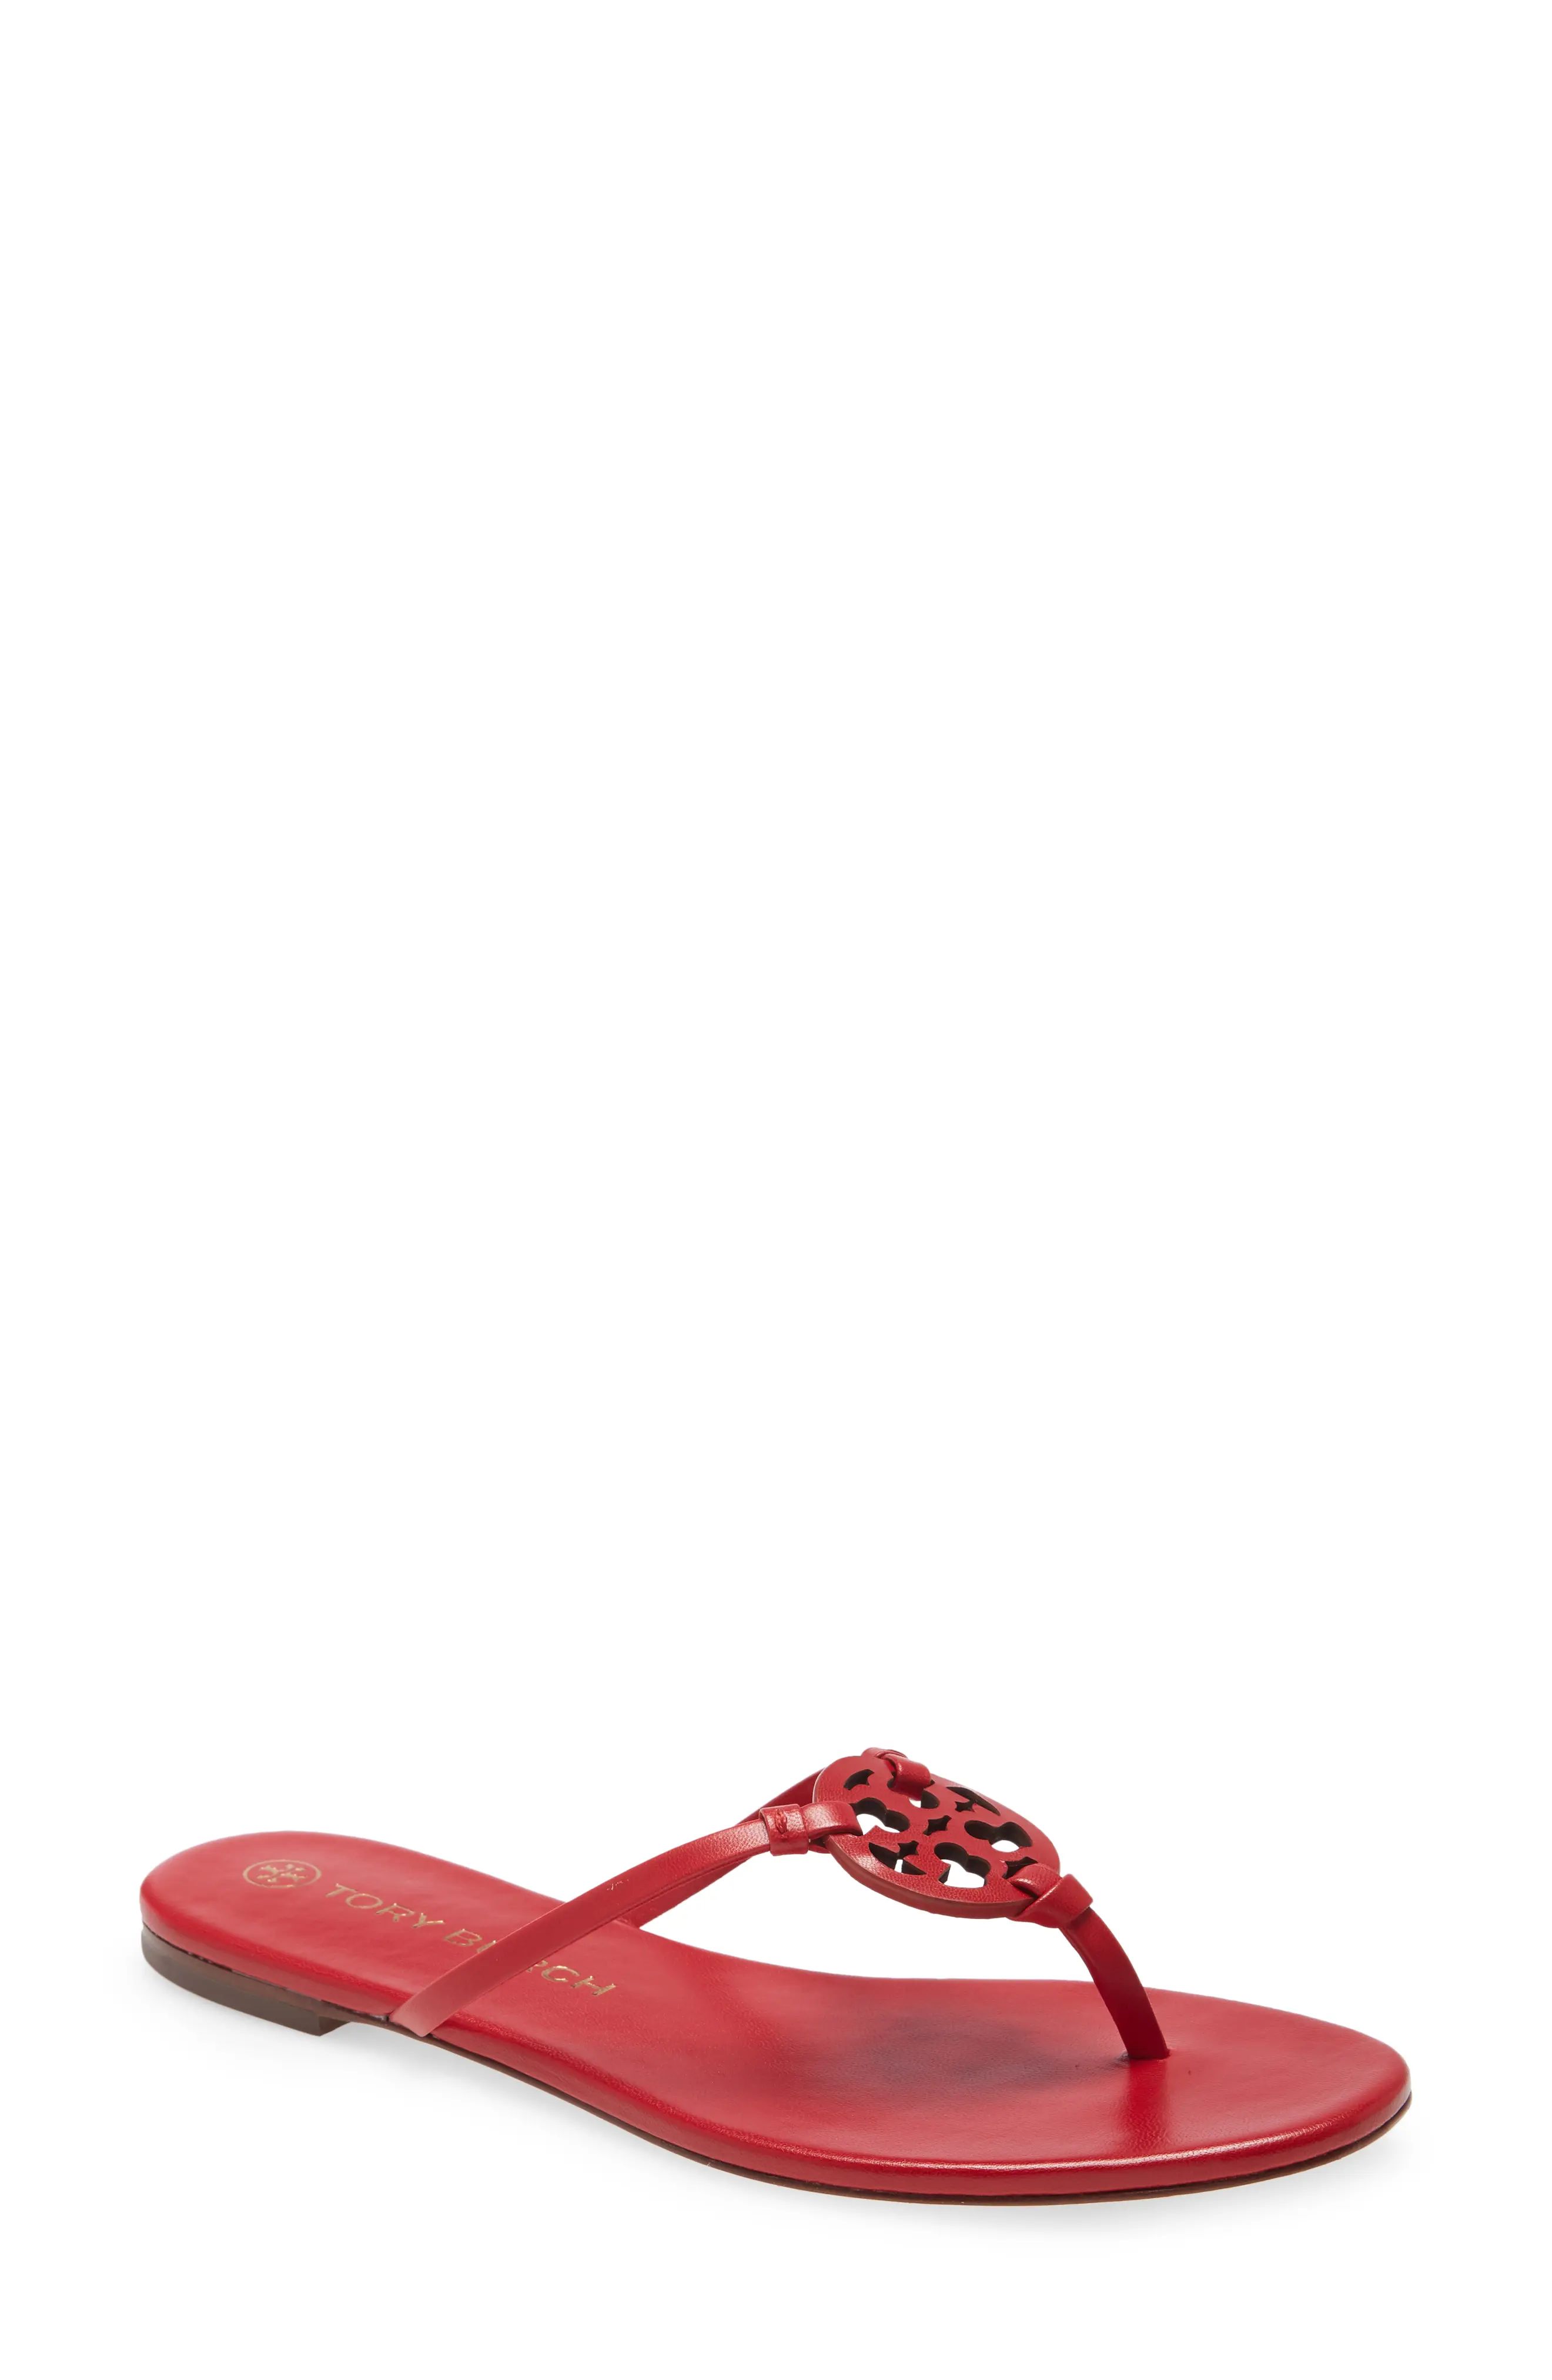 Tory Burch Miller Knotted Sandal in Tory Red/tory Red at Nordstrom, Size 5 | Nordstrom